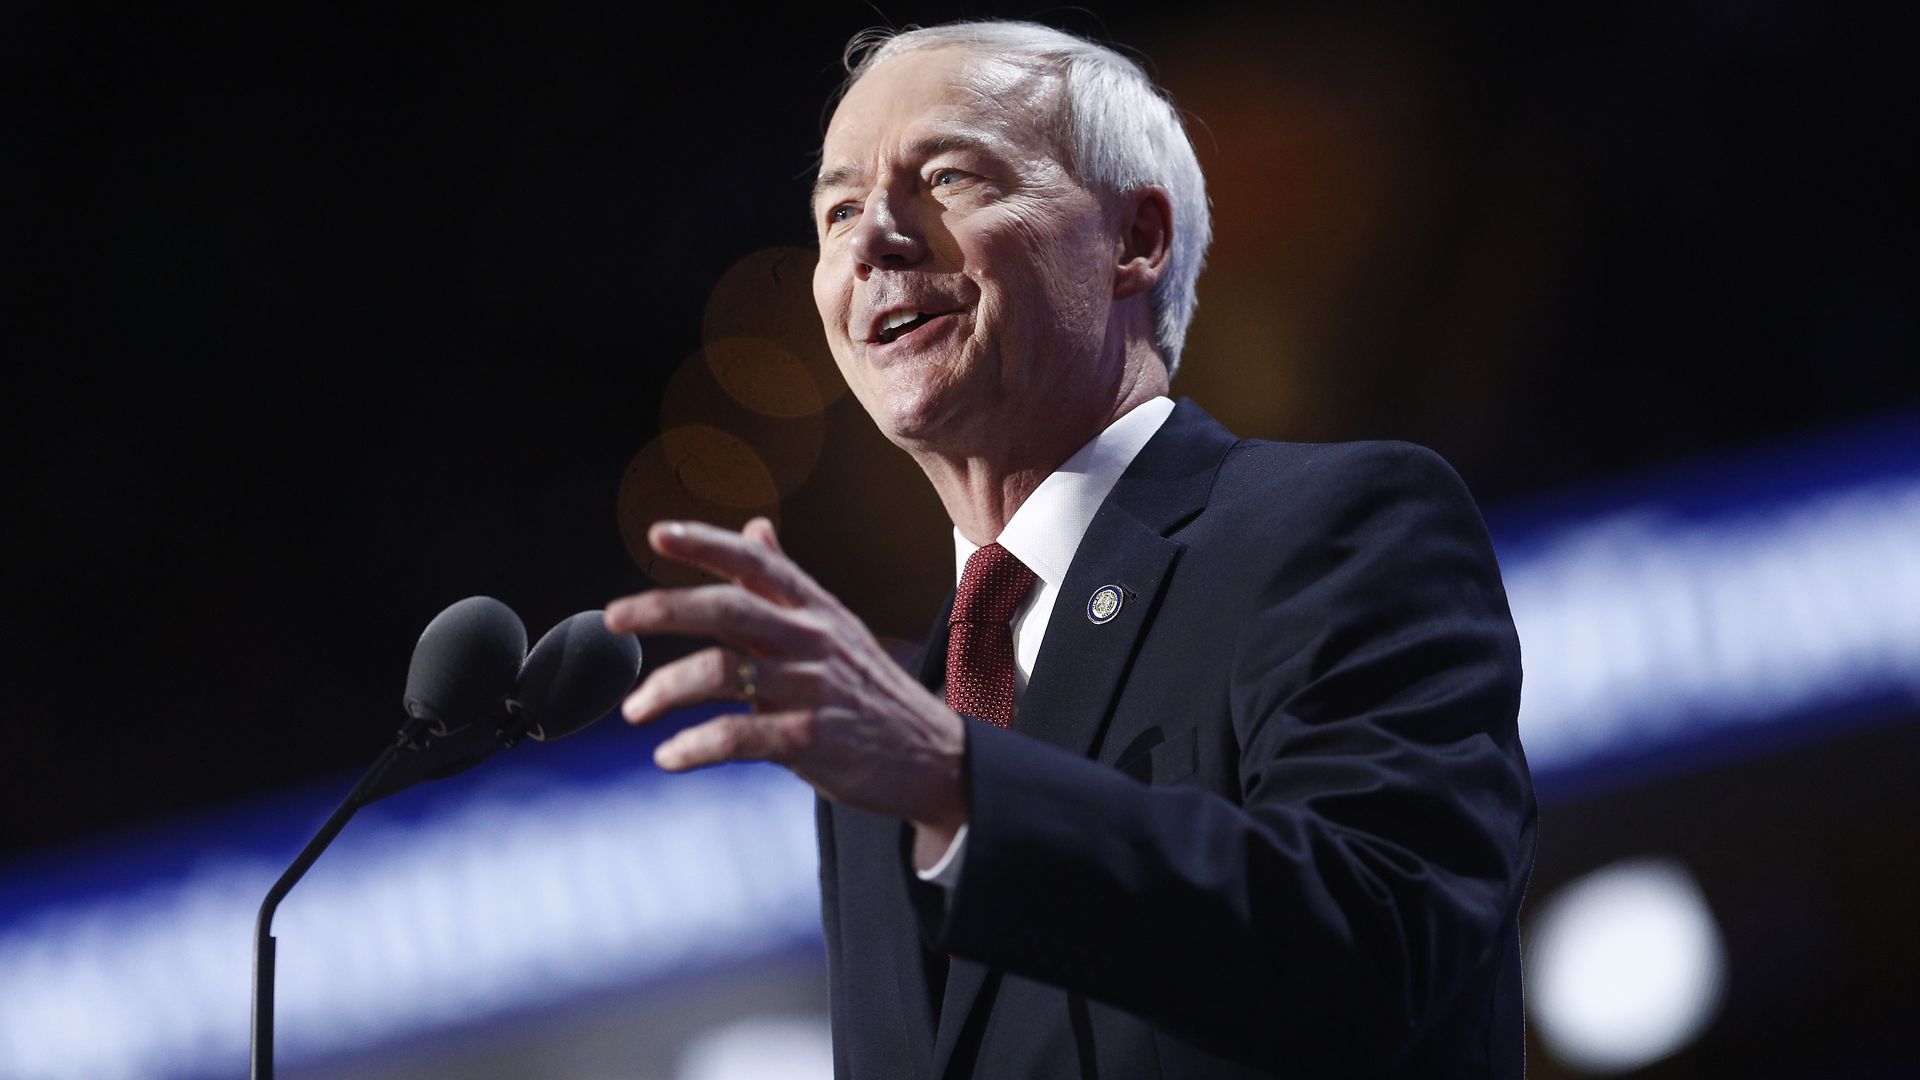 Asa Hutchinson speaks into a microphone while wearing a suit.